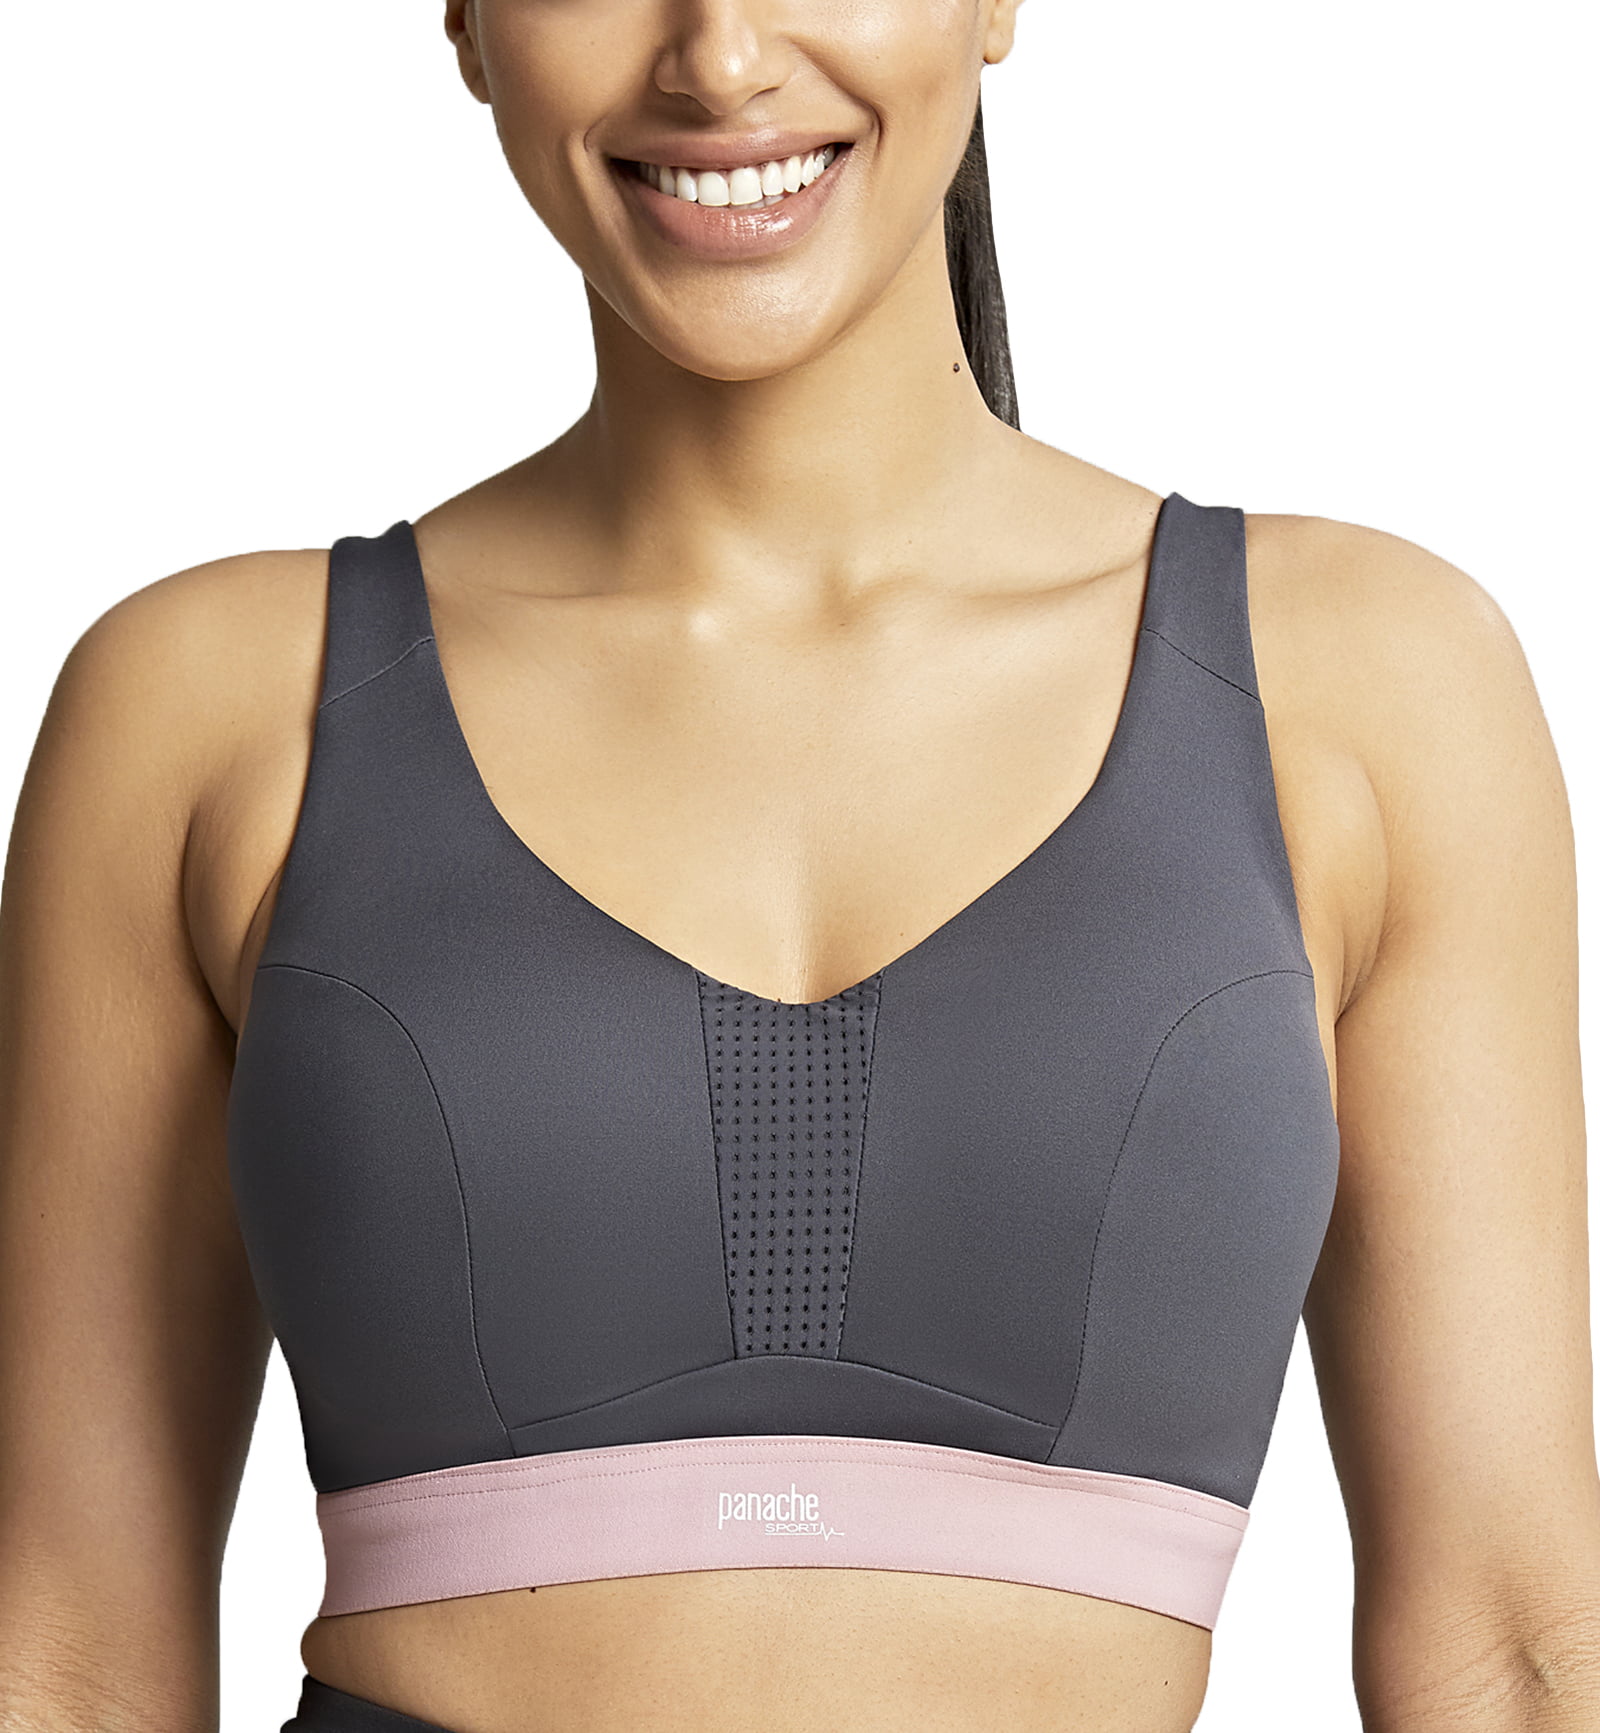 Panache Ultra Perform Non-padded Underwire Sports Bra (5022),28F,Charcoal